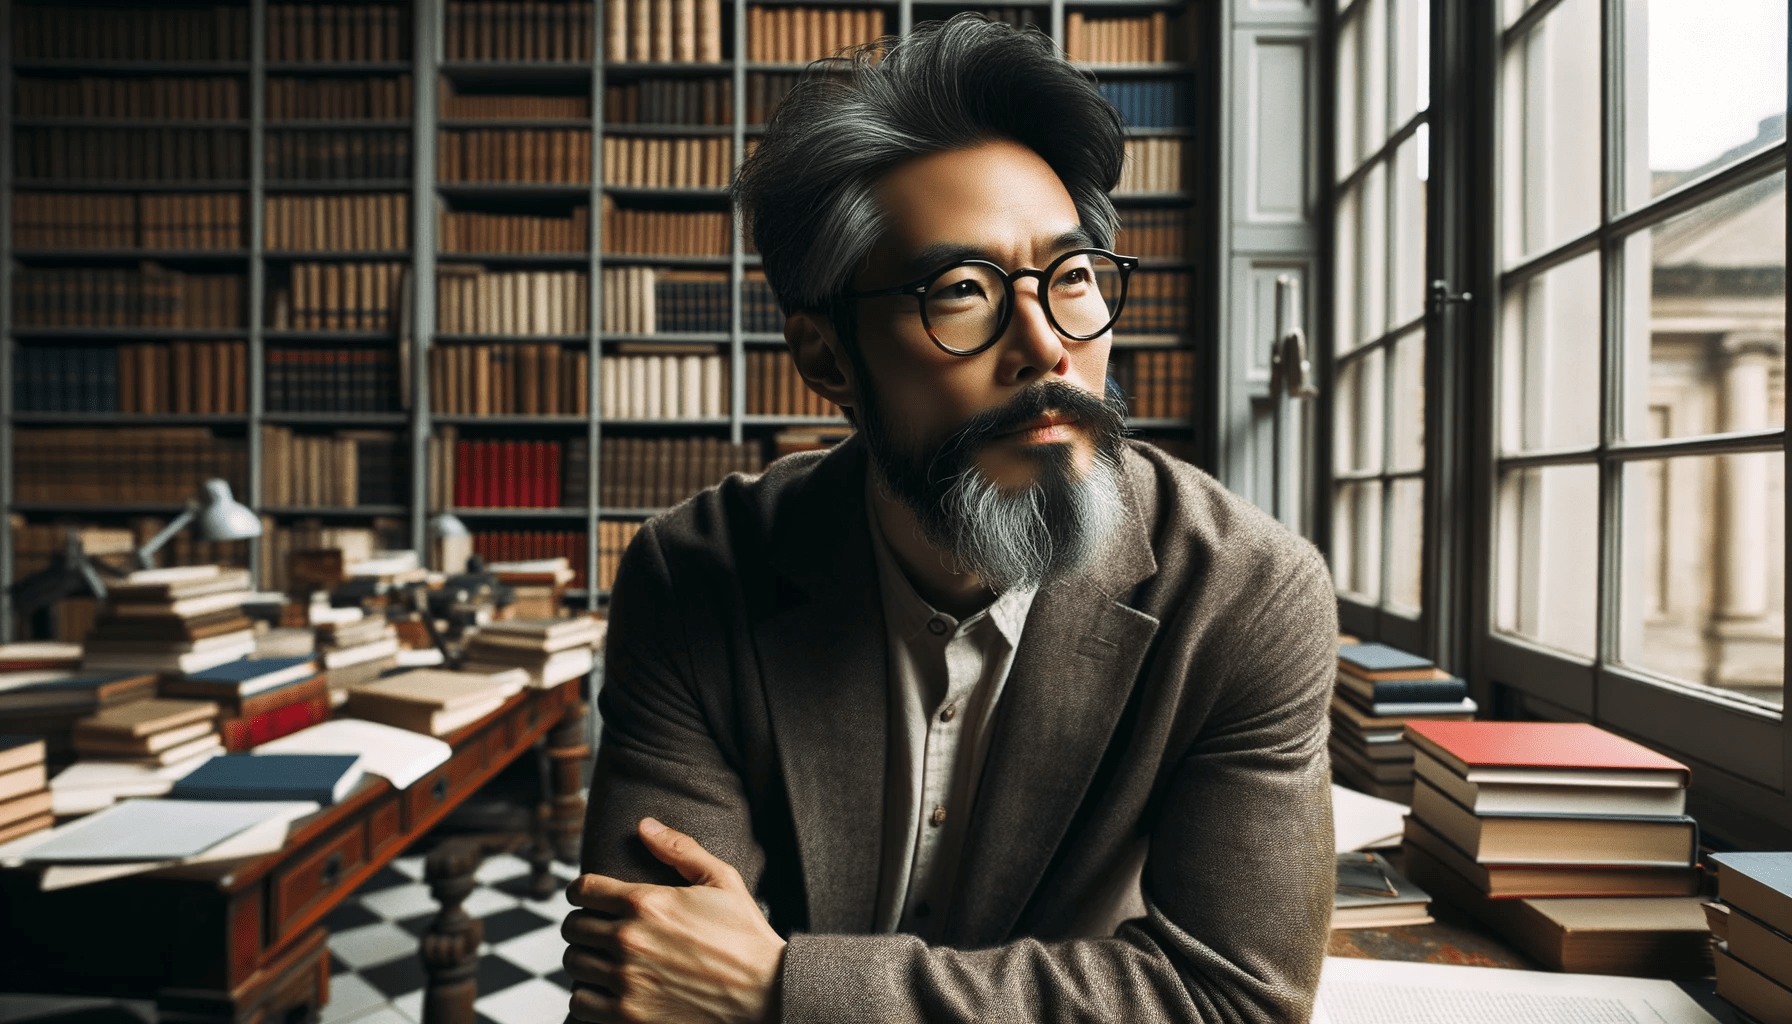 Photo in a scholars office  An Asian man with a salt and pepper beard and contemporary glasses is leaning against a desk gazing out of a window with